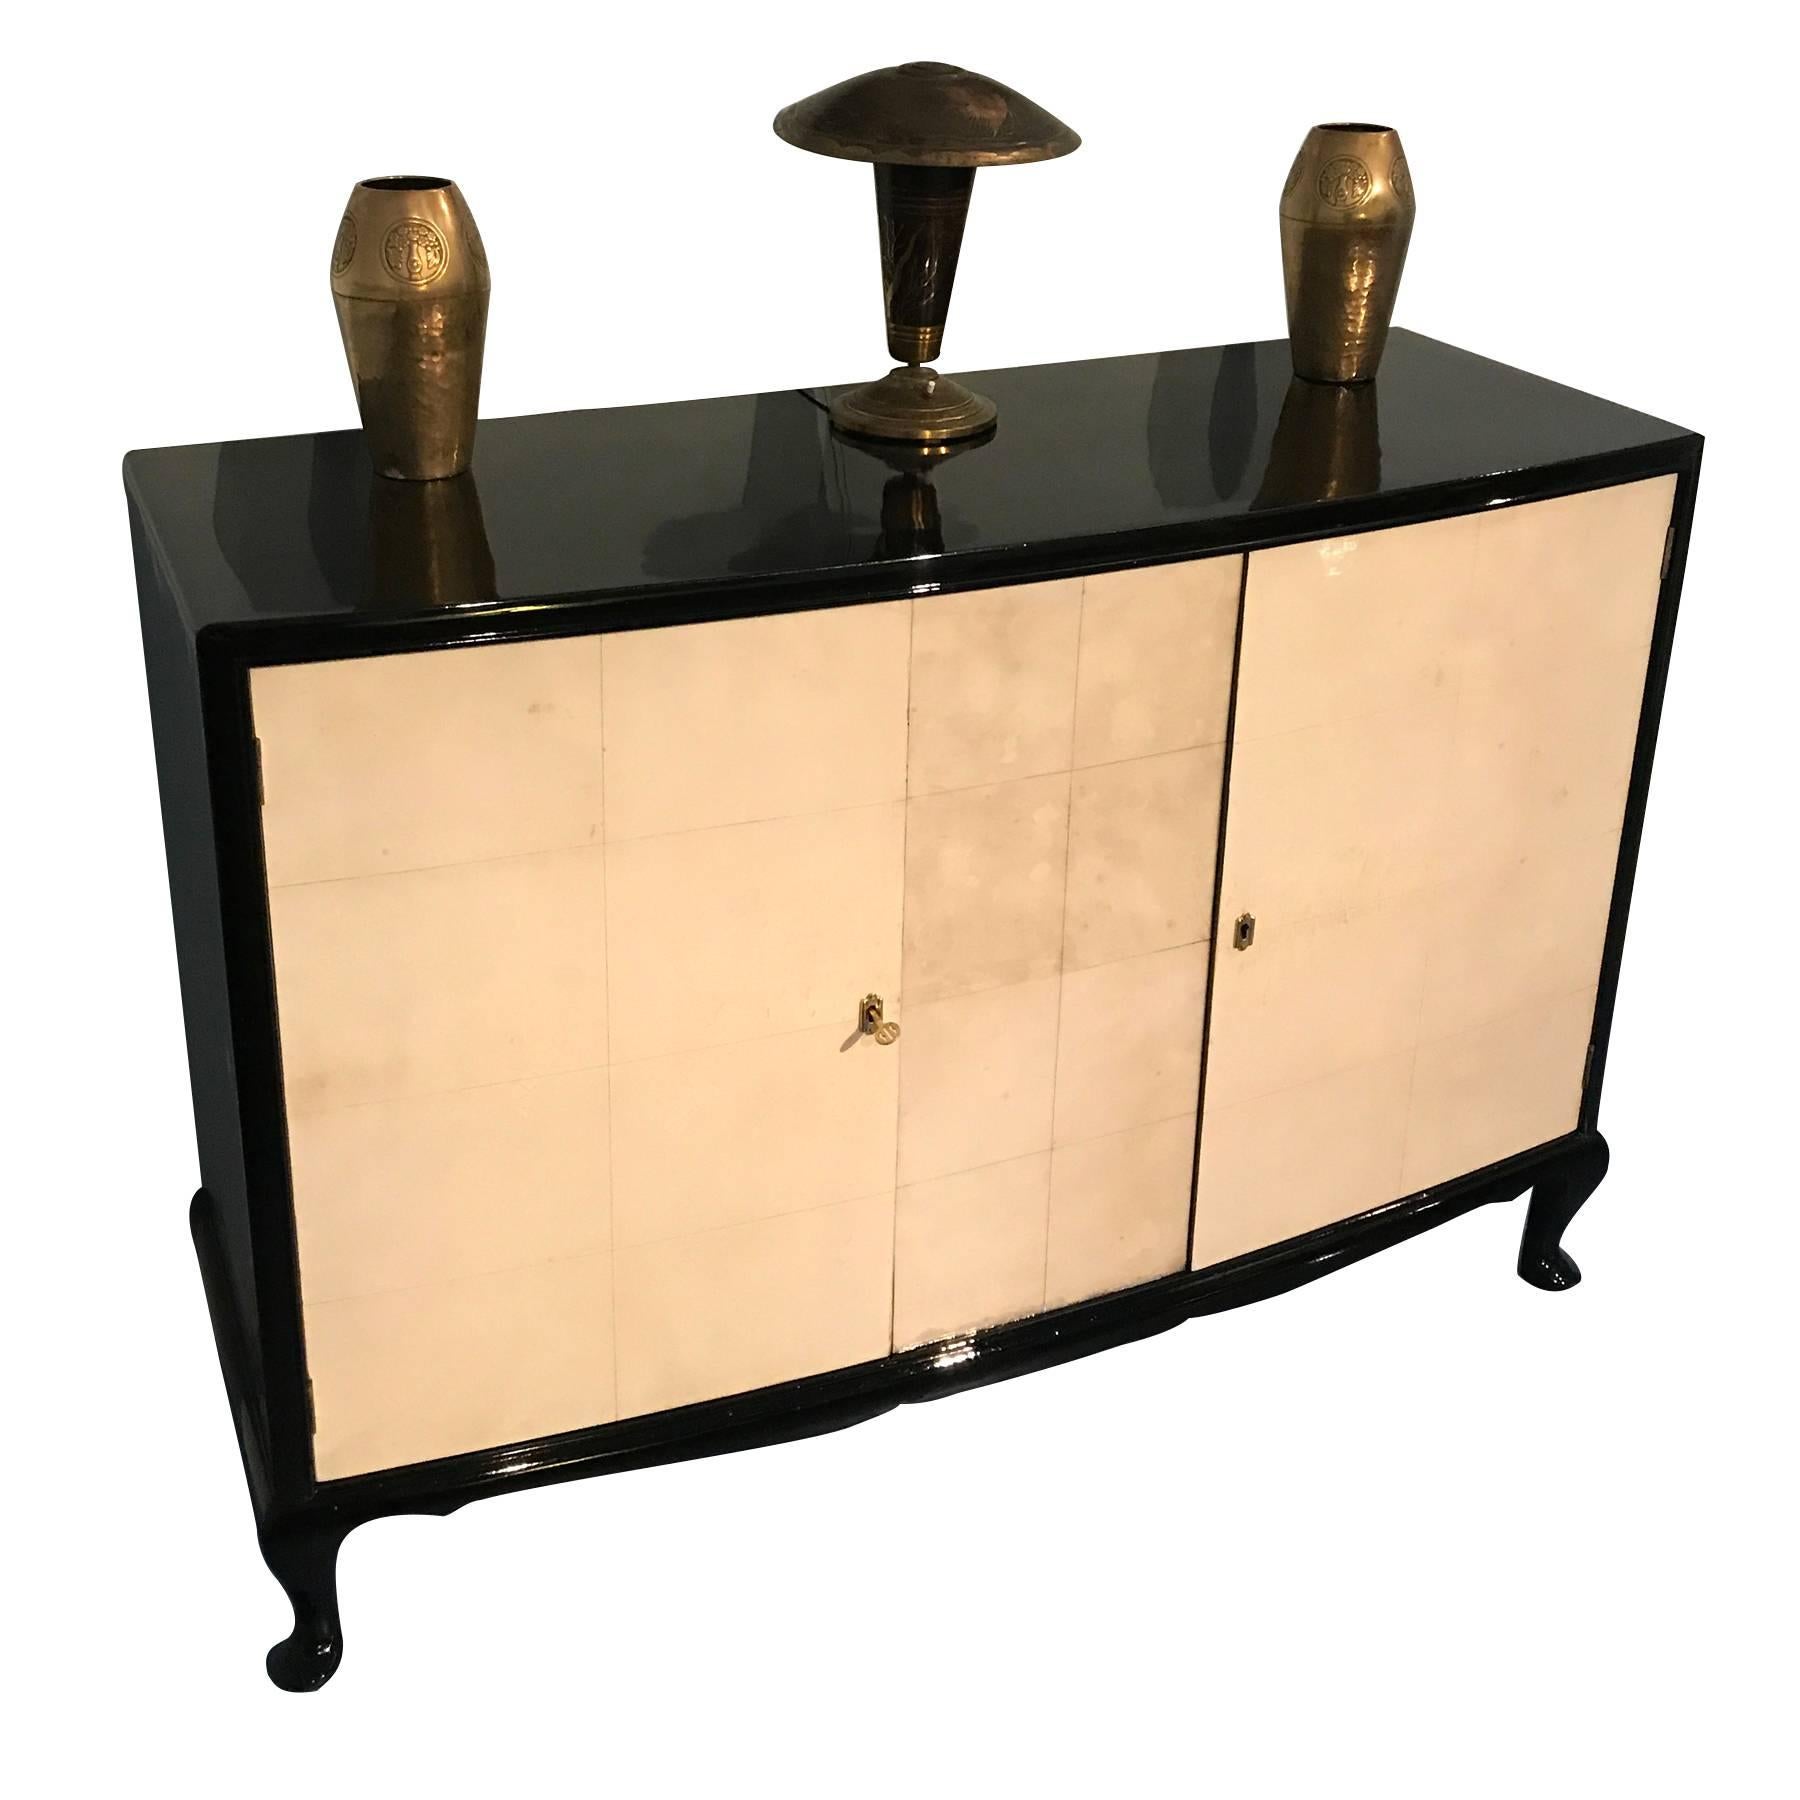 Elegant French Art Deco parchment sideboard manufactured in France in the 1950s.
Black lacquered side, top and legs. Clear lines and a simple but stylish shape.
Completely restored.